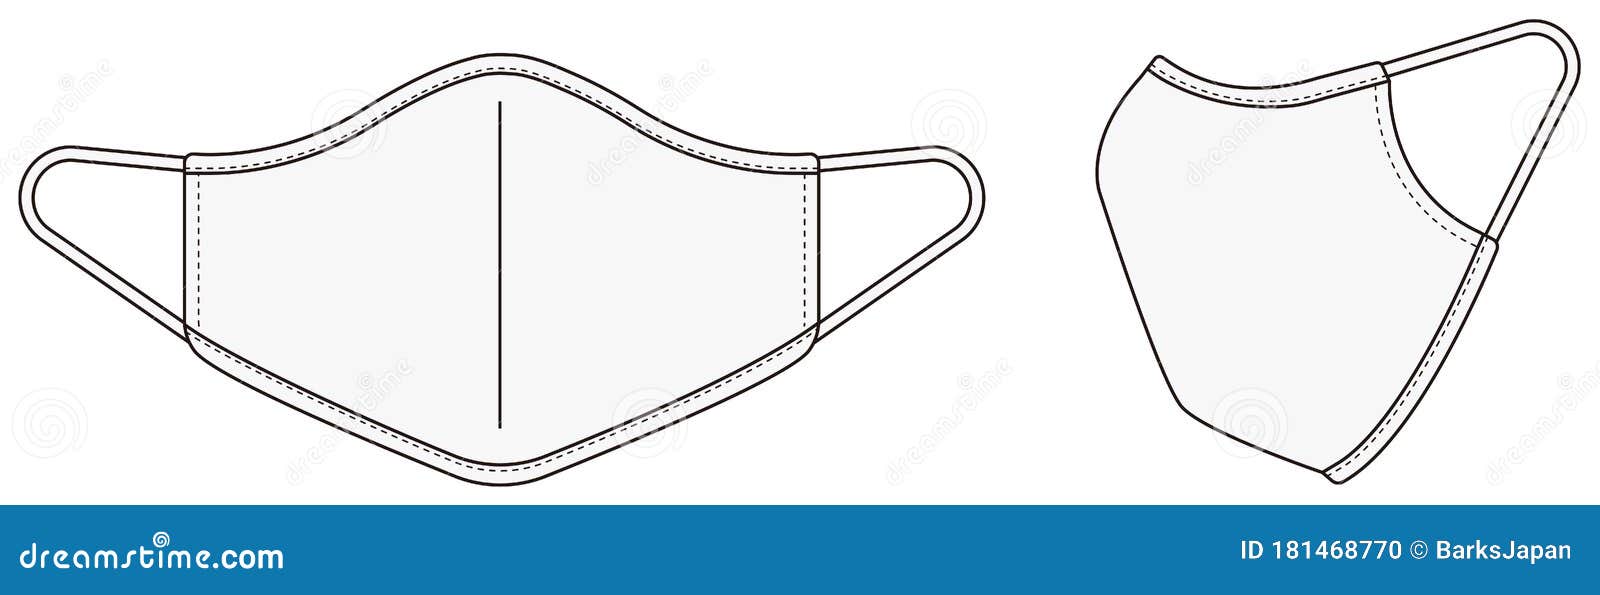 mask template free Medical Face Mask Vector Template Illustration Stock Vector